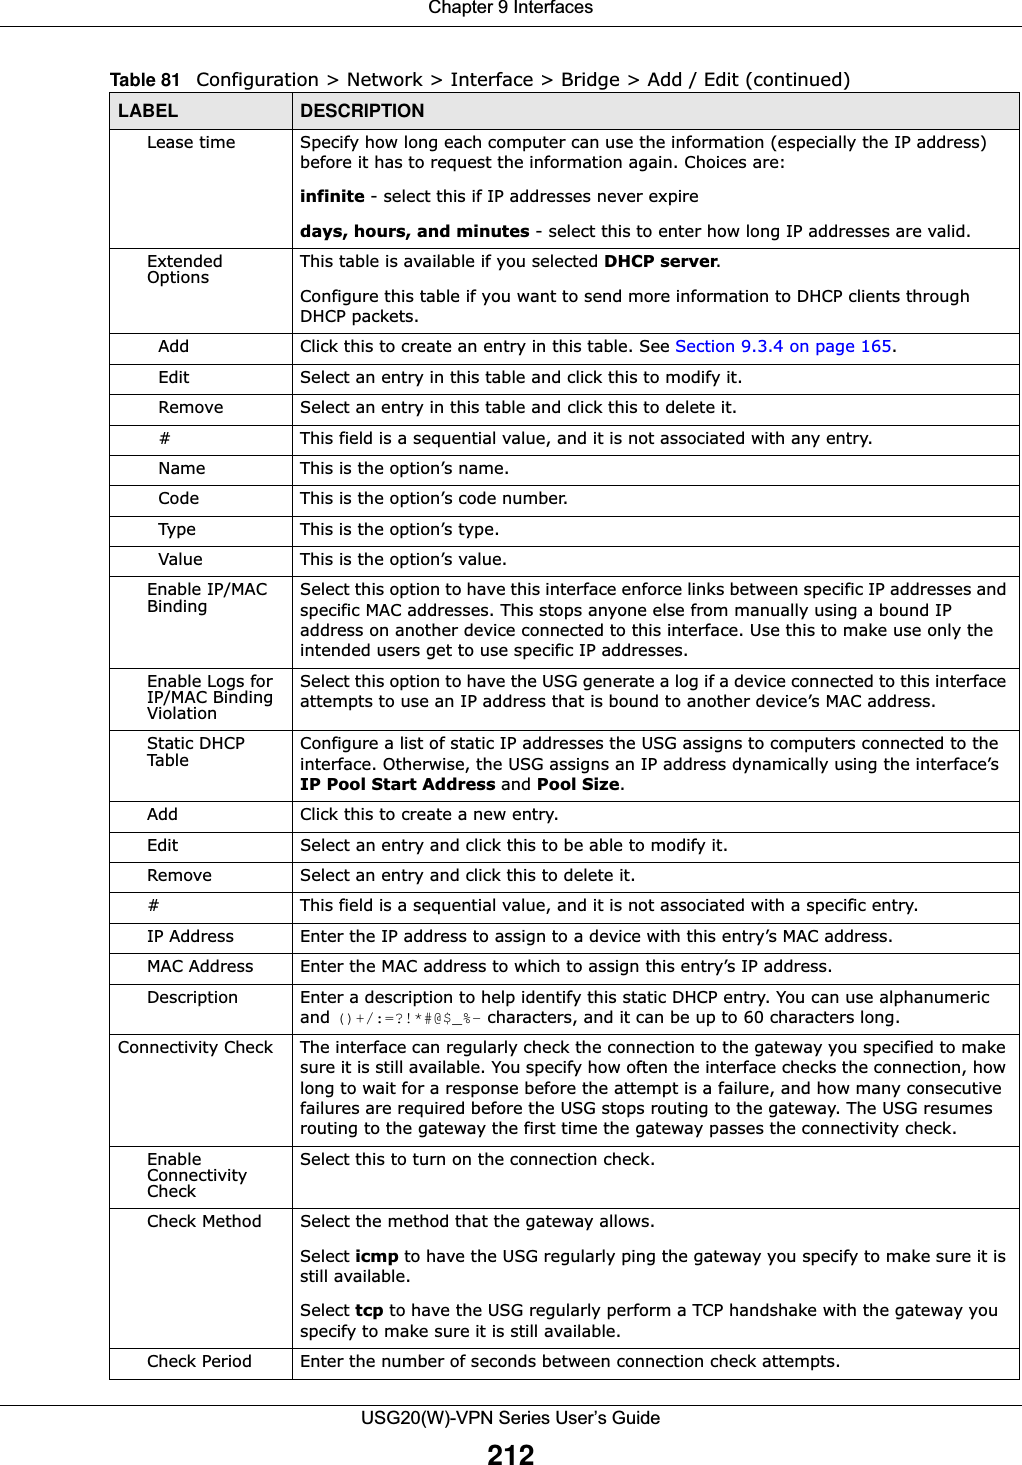 Chapter 9 InterfacesUSG20(W)-VPN Series User’s Guide212Lease time Specify how long each computer can use the information (especially the IP address) before it has to request the information again. Choices are:infinite - select this if IP addresses never expiredays, hours, and minutes - select this to enter how long IP addresses are valid.Extended Options This table is available if you selected DHCP server.Configure this table if you want to send more information to DHCP clients through DHCP packets.  Add Click this to create an entry in this table. See Section 9.3.4 on page 165.  Edit Select an entry in this table and click this to modify it.  Remove Select an entry in this table and click this to delete it.  # This field is a sequential value, and it is not associated with any entry.  Name This is the option’s name.  Code This is the option’s code number.  Type This is the option’s type.  Value This is the option’s value.Enable IP/MAC Binding Select this option to have this interface enforce links between specific IP addresses and specific MAC addresses. This stops anyone else from manually using a bound IP address on another device connected to this interface. Use this to make use only the intended users get to use specific IP addresses.Enable Logs for IP/MAC Binding ViolationSelect this option to have the USG generate a log if a device connected to this interface attempts to use an IP address that is bound to another device’s MAC address.Static DHCP Table Configure a list of static IP addresses the USG assigns to computers connected to the interface. Otherwise, the USG assigns an IP address dynamically using the interface’s IP Pool Start Address and Pool Size.Add Click this to create a new entry. Edit Select an entry and click this to be able to modify it. Remove Select an entry and click this to delete it. # This field is a sequential value, and it is not associated with a specific entry.IP Address Enter the IP address to assign to a device with this entry’s MAC address.MAC Address Enter the MAC address to which to assign this entry’s IP address.Description Enter a description to help identify this static DHCP entry. You can use alphanumeric and ()+/:=?!*#@$_%- characters, and it can be up to 60 characters long.Connectivity Check The interface can regularly check the connection to the gateway you specified to make sure it is still available. You specify how often the interface checks the connection, how long to wait for a response before the attempt is a failure, and how many consecutive failures are required before the USG stops routing to the gateway. The USG resumes routing to the gateway the first time the gateway passes the connectivity check.Enable Connectivity CheckSelect this to turn on the connection check.Check Method Select the method that the gateway allows. Select icmp to have the USG regularly ping the gateway you specify to make sure it is still available. Select tcp to have the USG regularly perform a TCP handshake with the gateway you specify to make sure it is still available. Check Period Enter the number of seconds between connection check attempts.Table 81   Configuration &gt; Network &gt; Interface &gt; Bridge &gt; Add / Edit (continued)LABEL DESCRIPTION